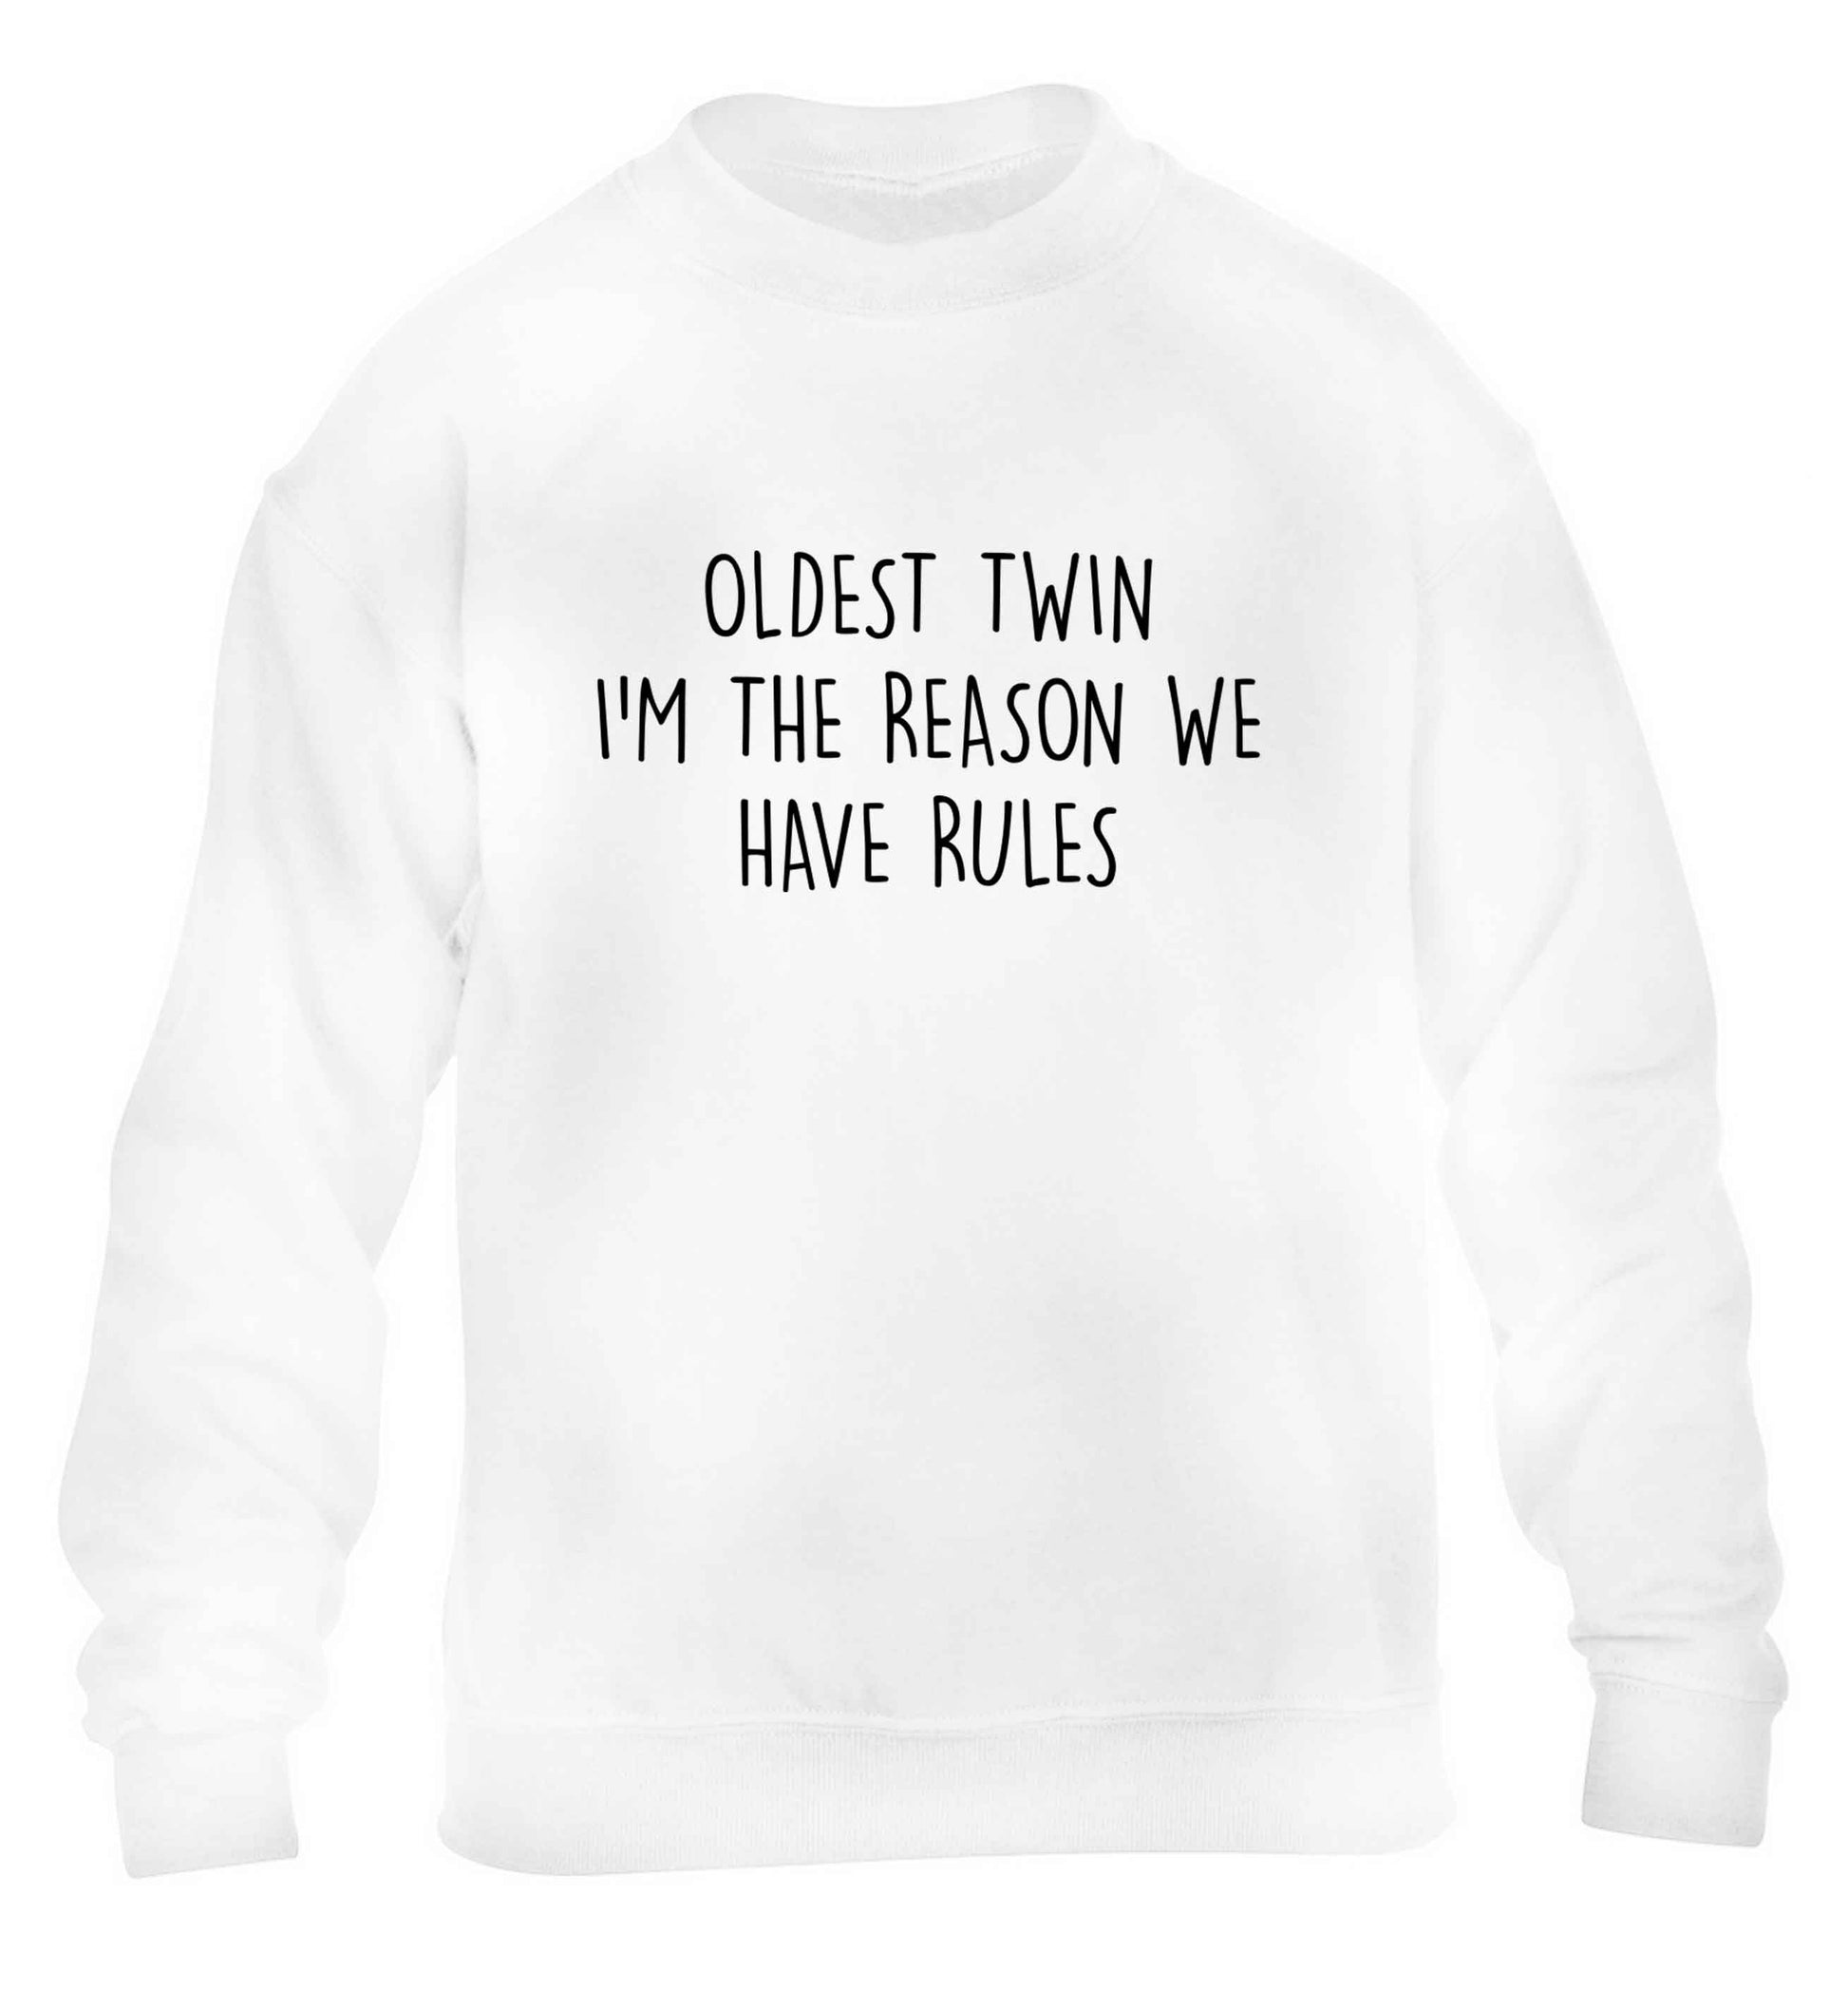 Oldest twin I'm the reason we have rules children's white sweater 12-13 Years